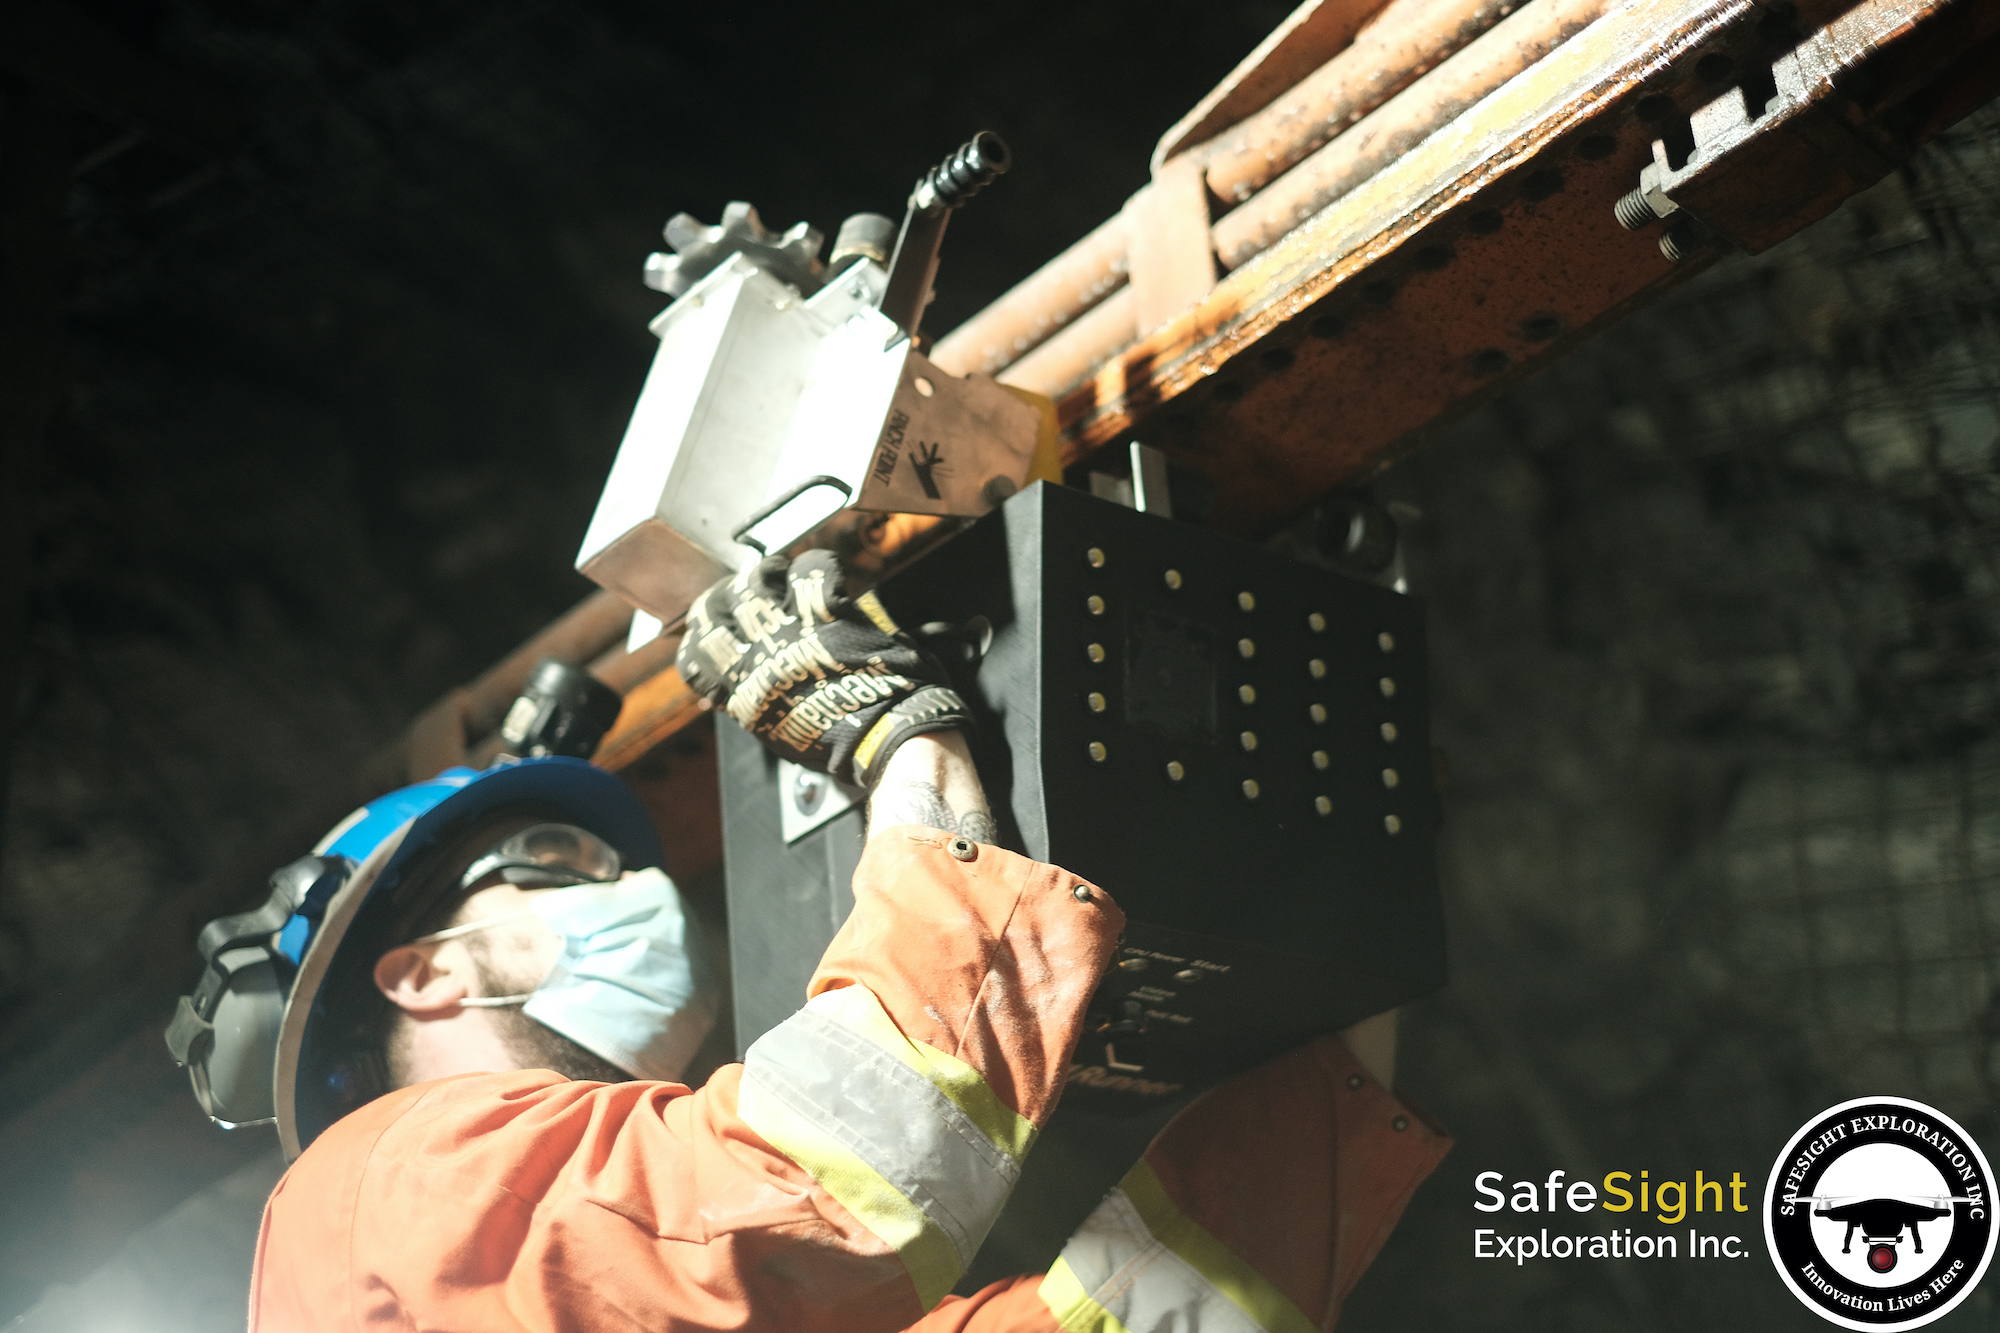 SafesSight Awarded for Innovation – Safety Innovation Award for 2020 Ontario Mining Contractor Safety Association